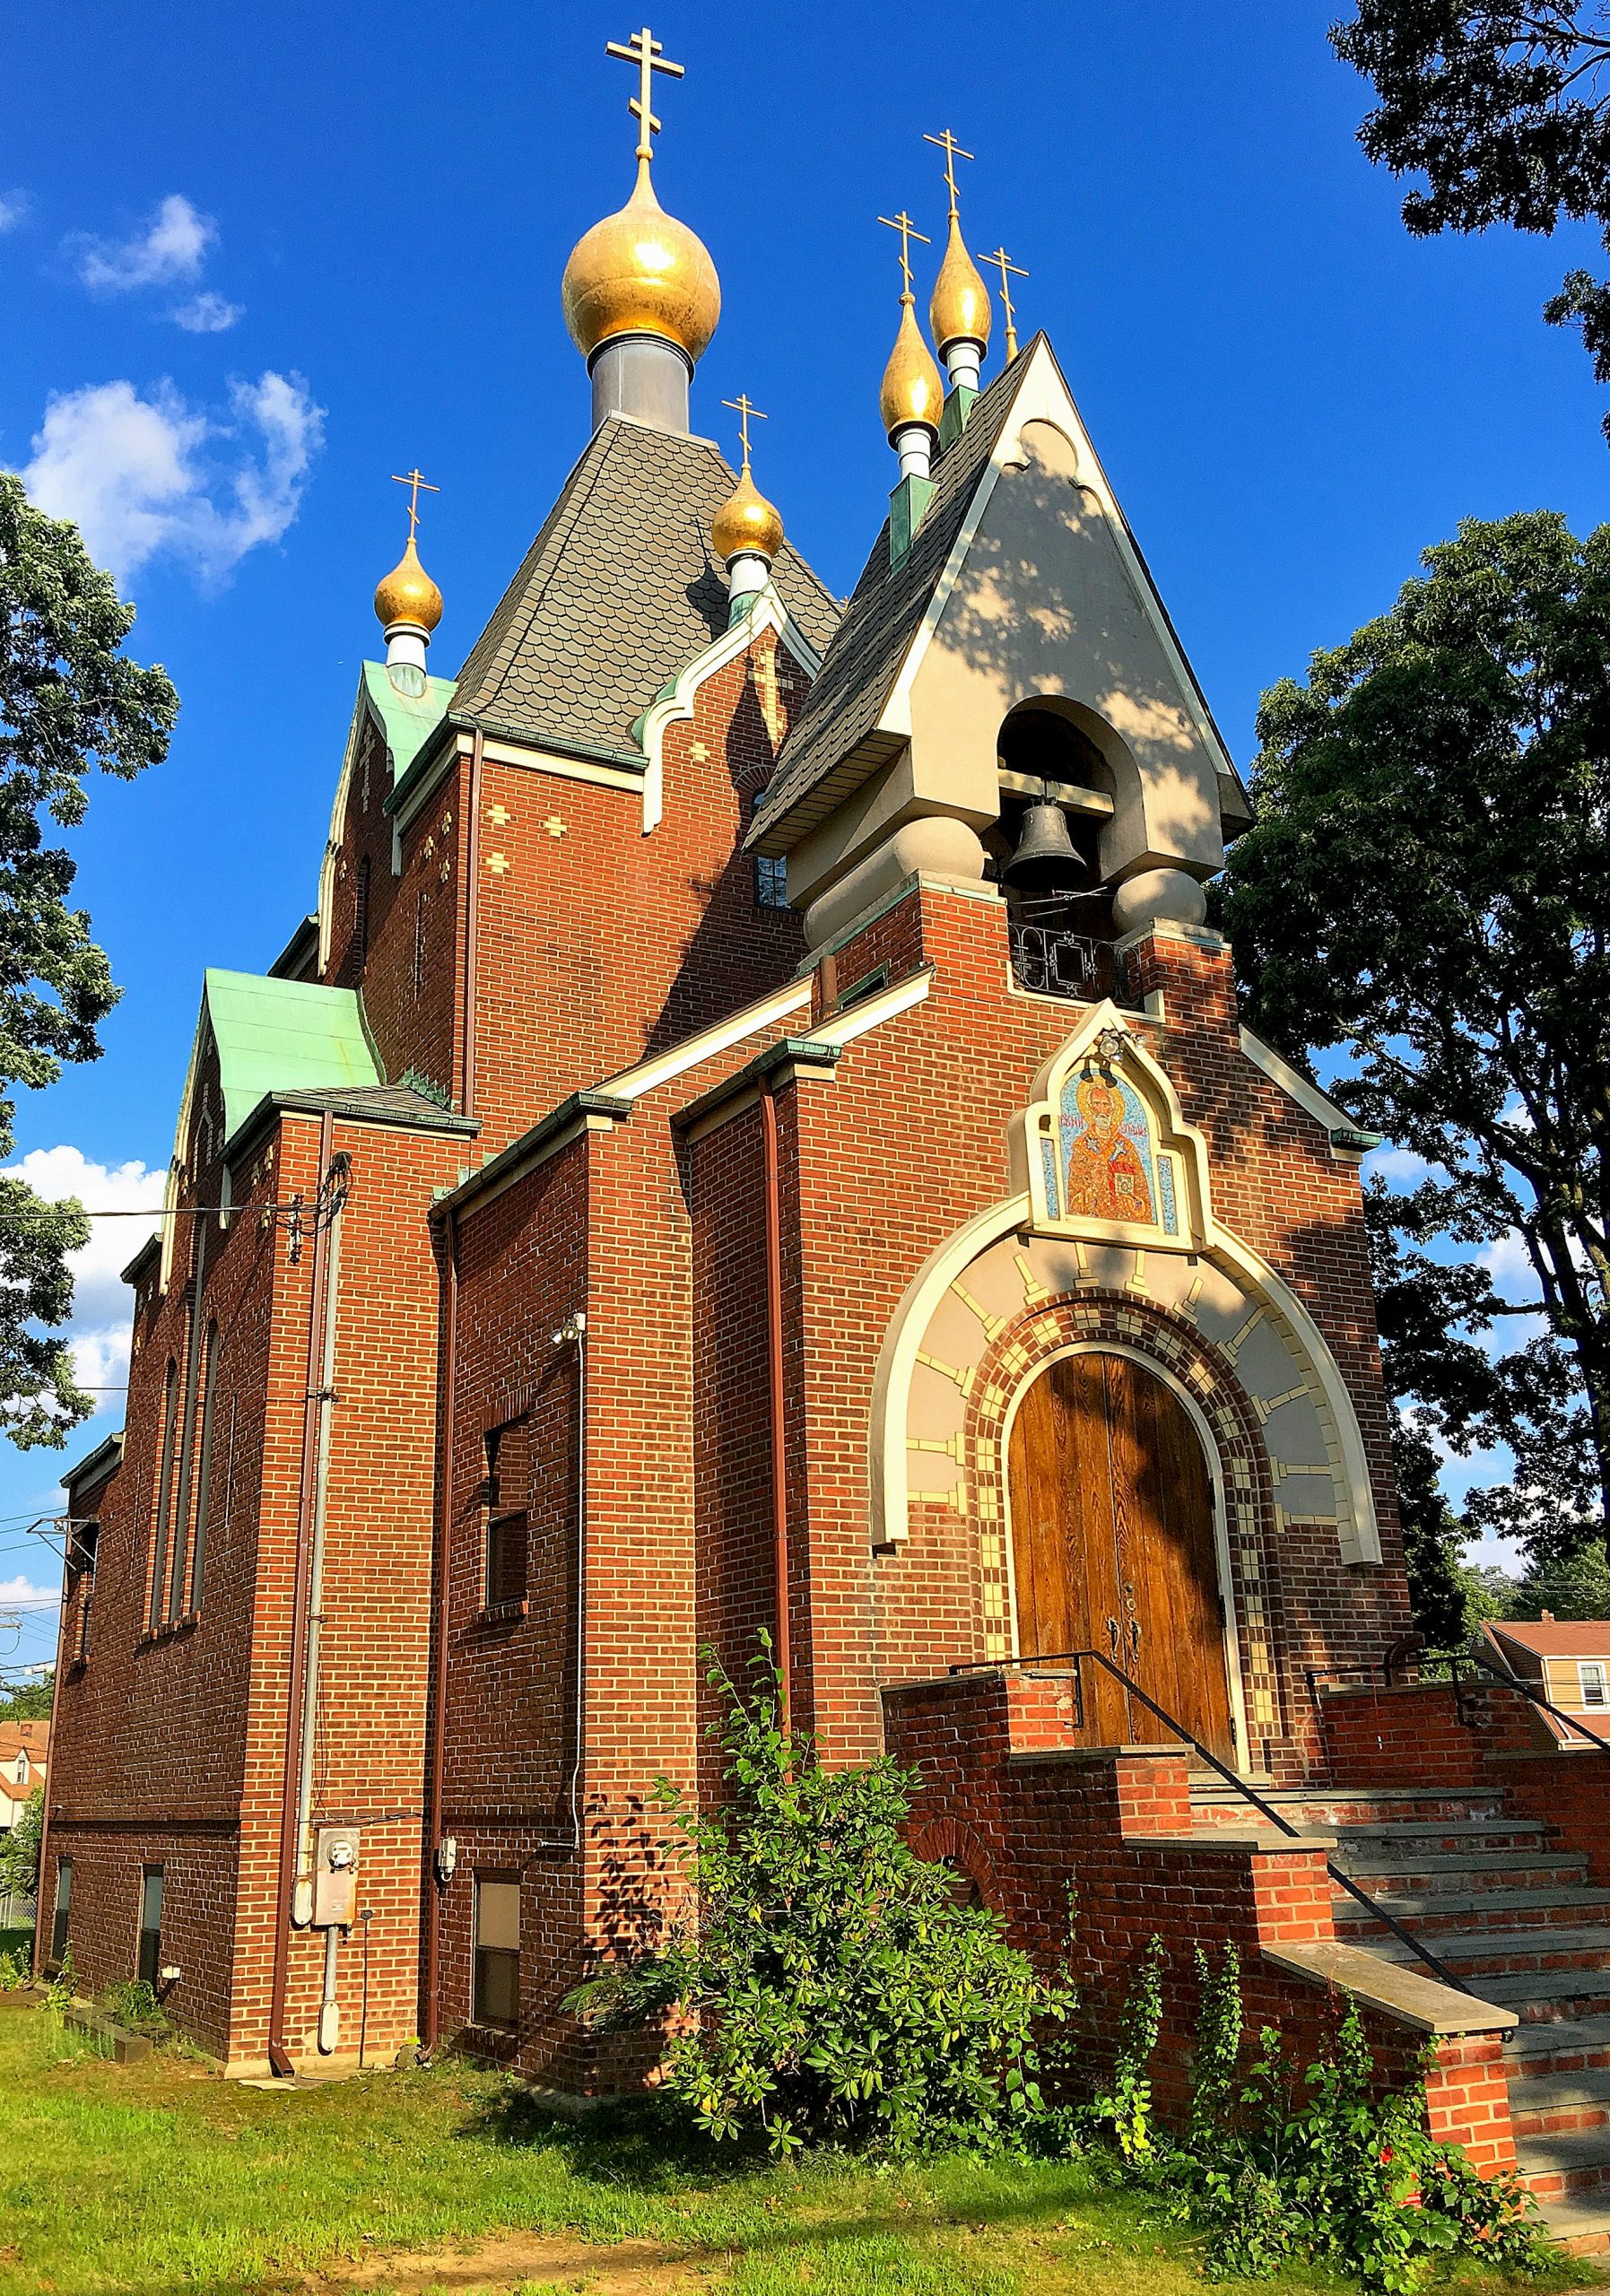 St. Nicholas Church was founded in 1929 in Stratford, Connecticut. Igor Sikorsky was a founding member.